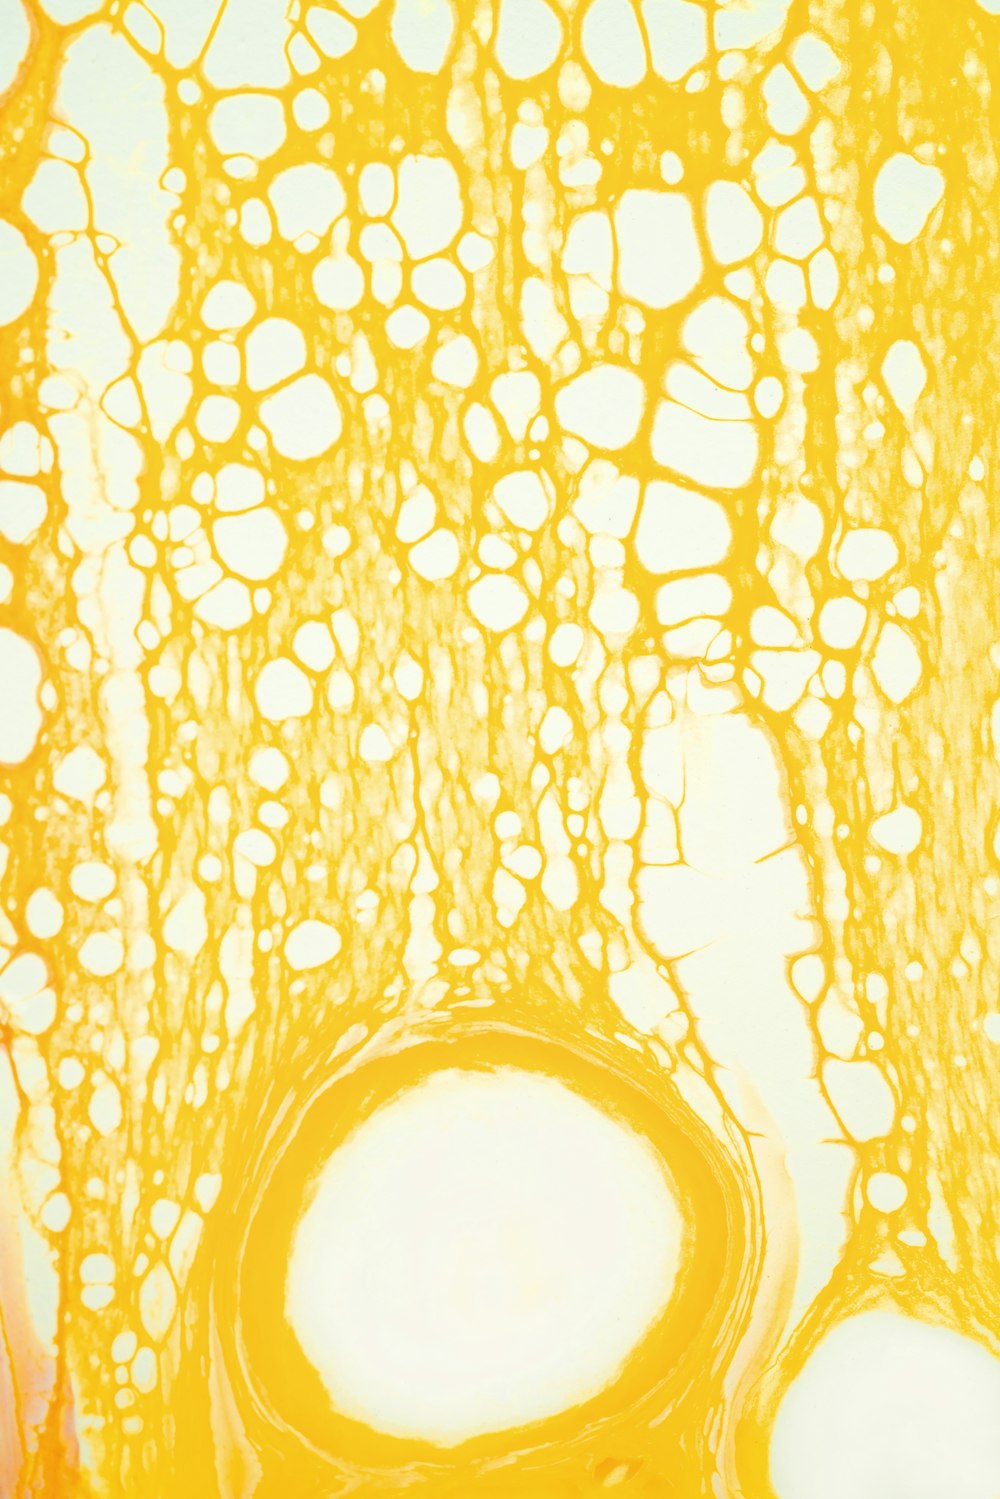 a close up view of a yellow substance